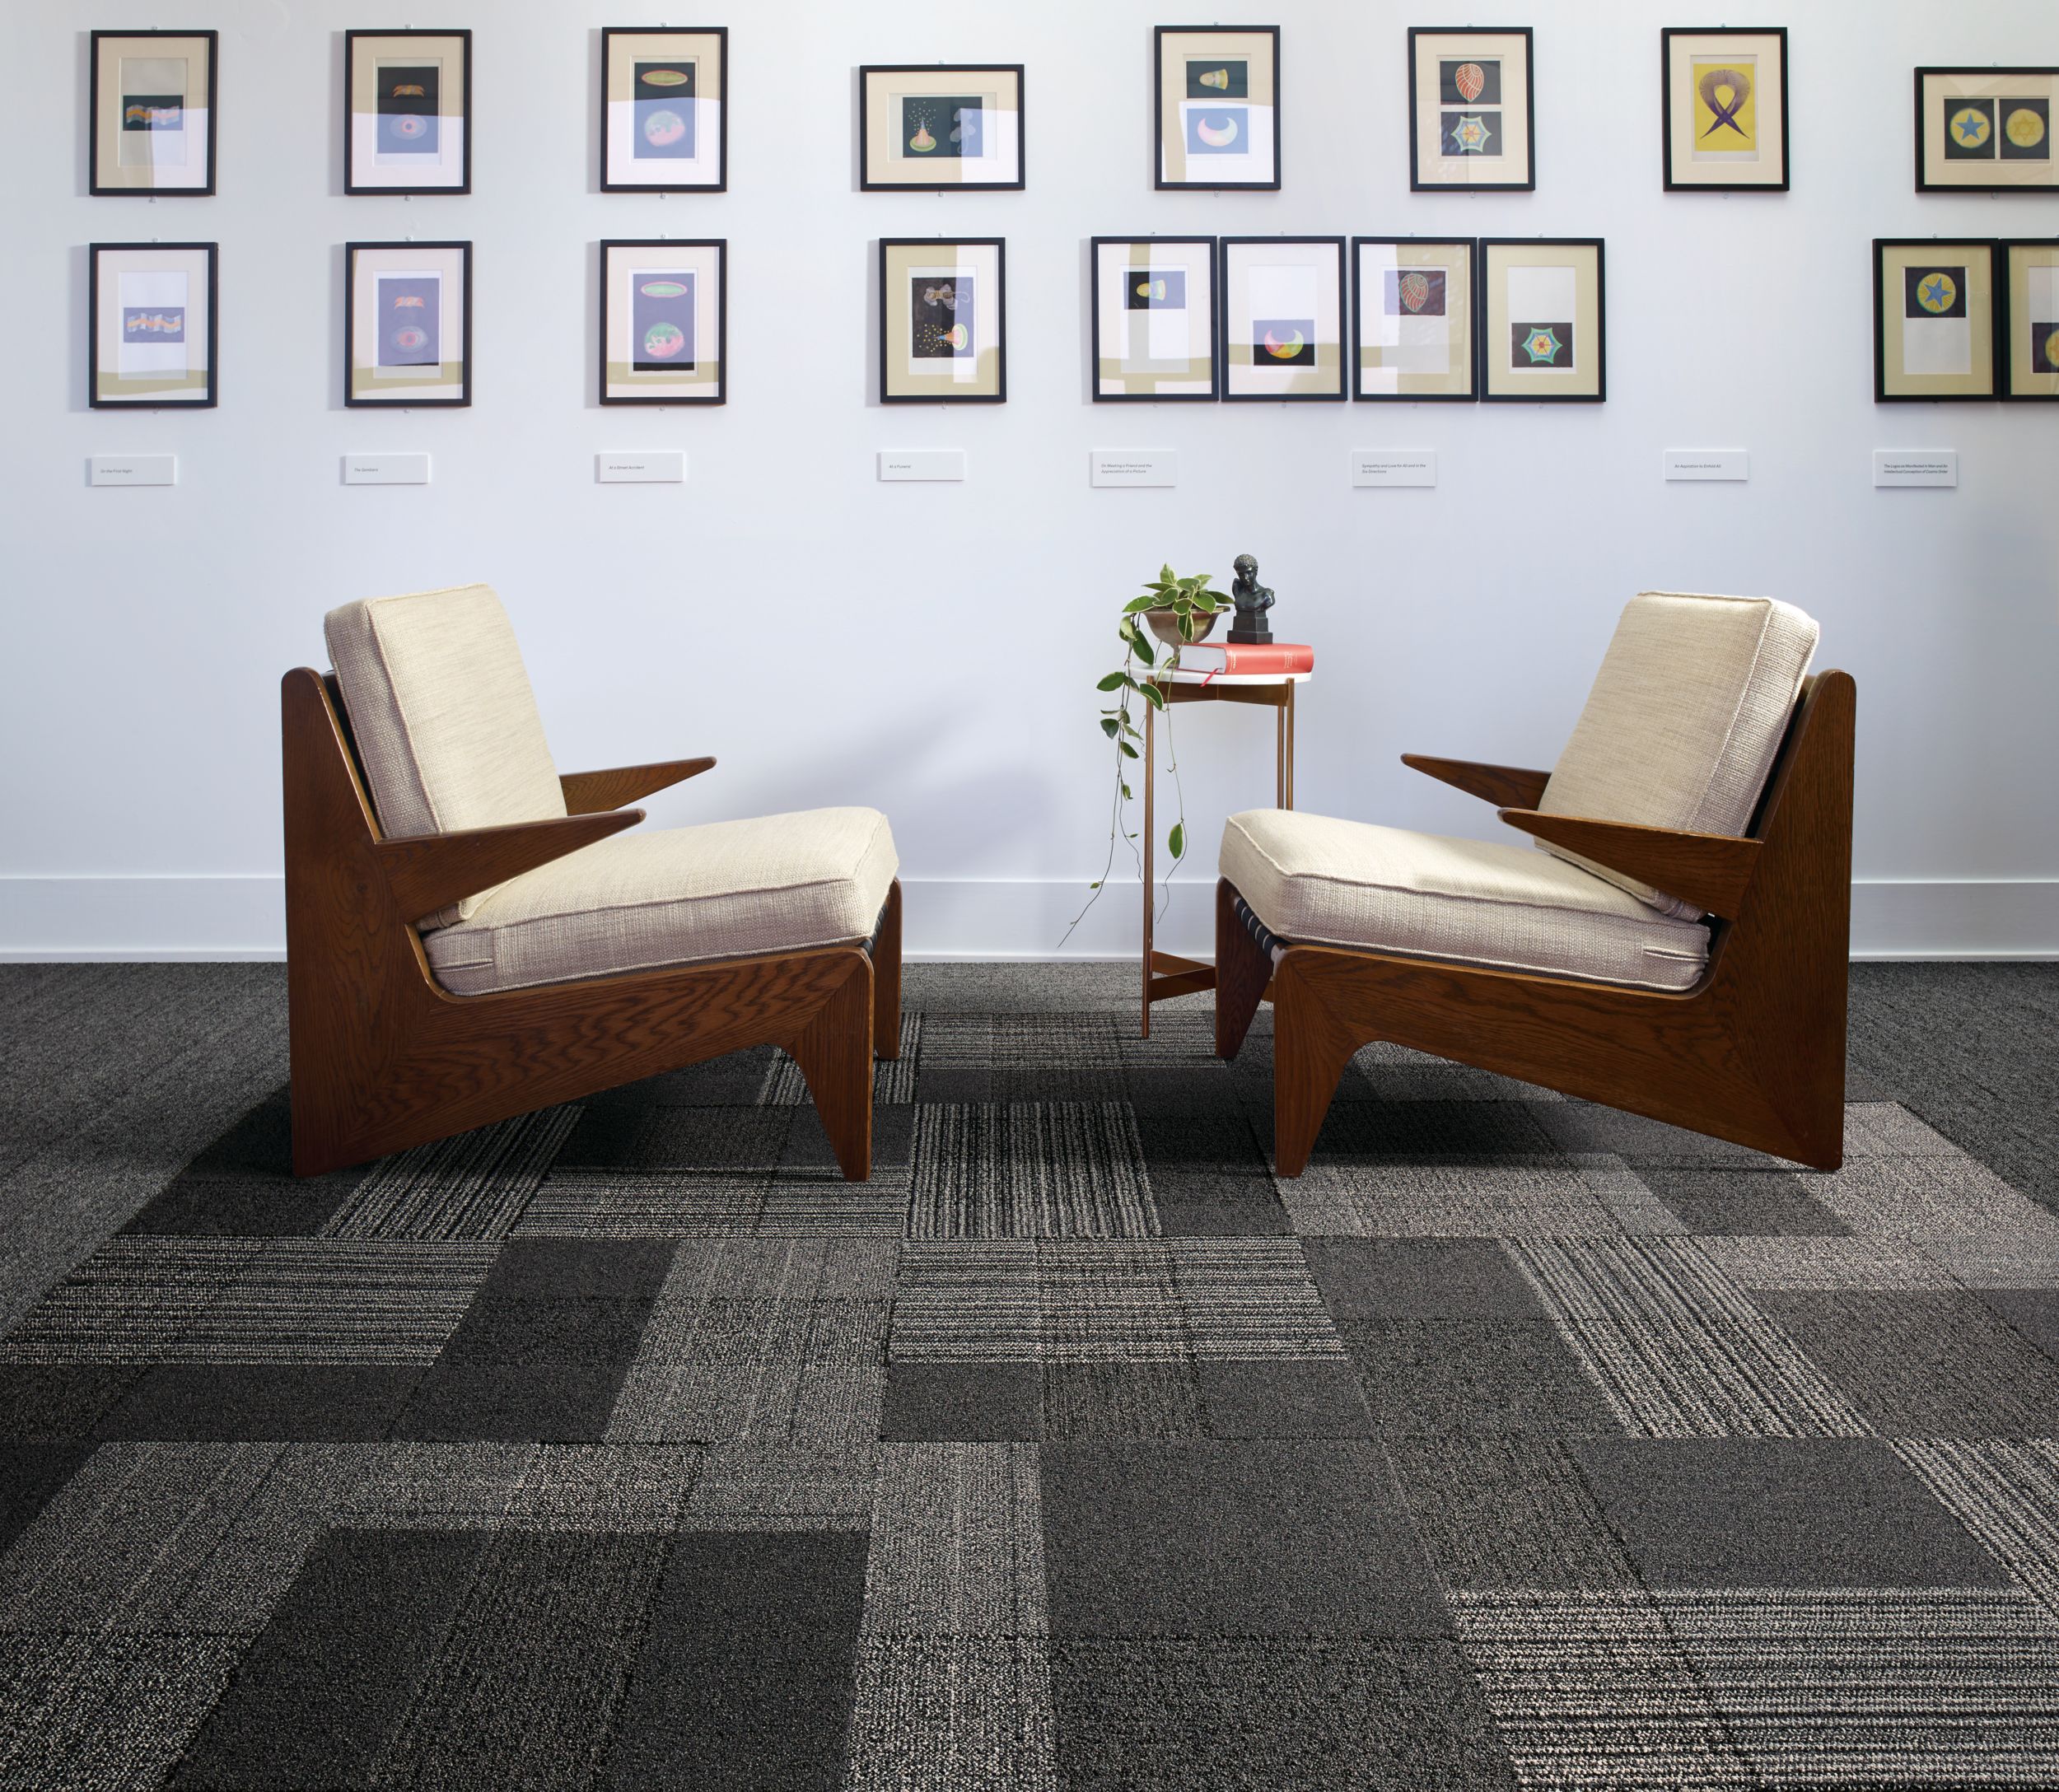 image Interface ShadowBox Velour carpet tile and WW860 plank carpet tile in seating area with two chairs and a lot of small prints on the wall numéro 2